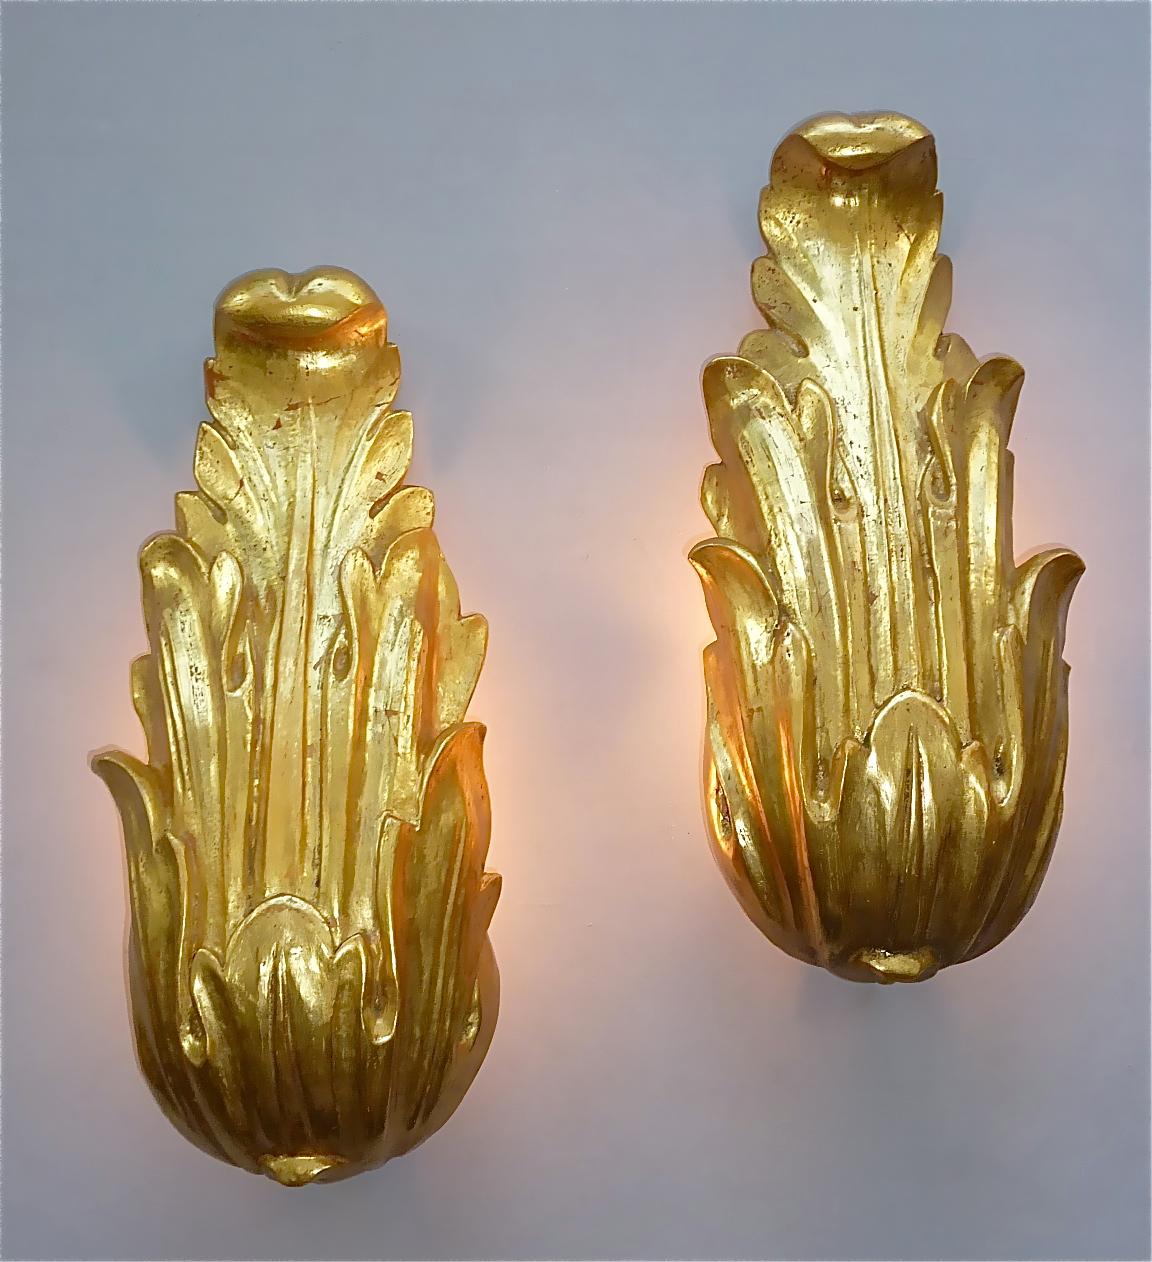 Sculptural large pair of antique Baroque Style Acanthus leaf sconces, Germany or Italy around 1900 to 1920. The expressive and vividly hand-carved and high quality wood sconces have a red ground which is partly visible, a thin off white plaster